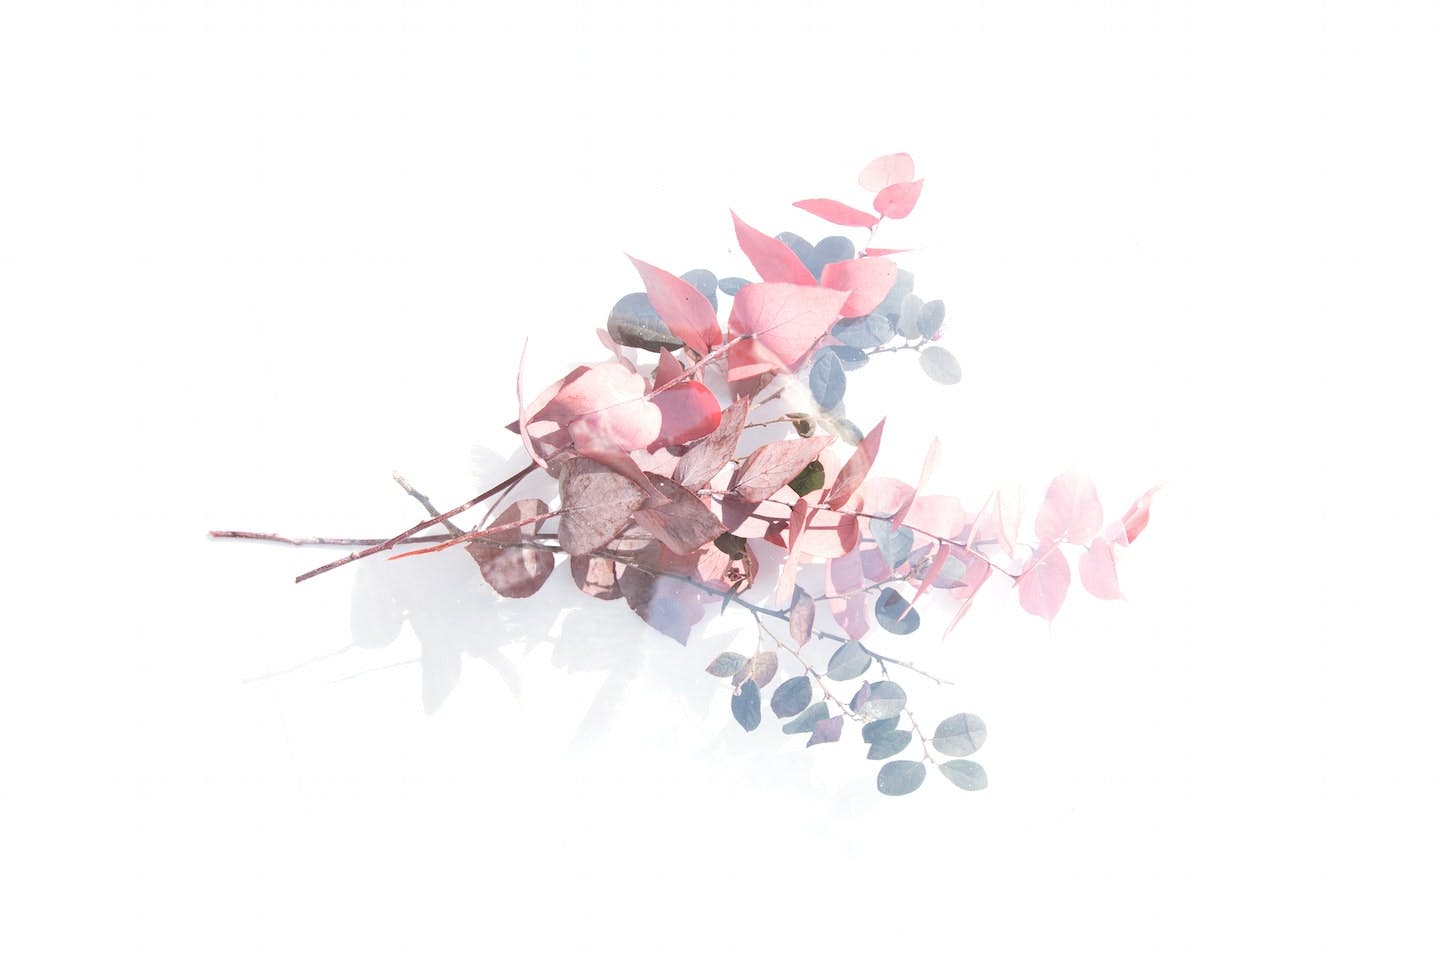 floral background image to decorate the header